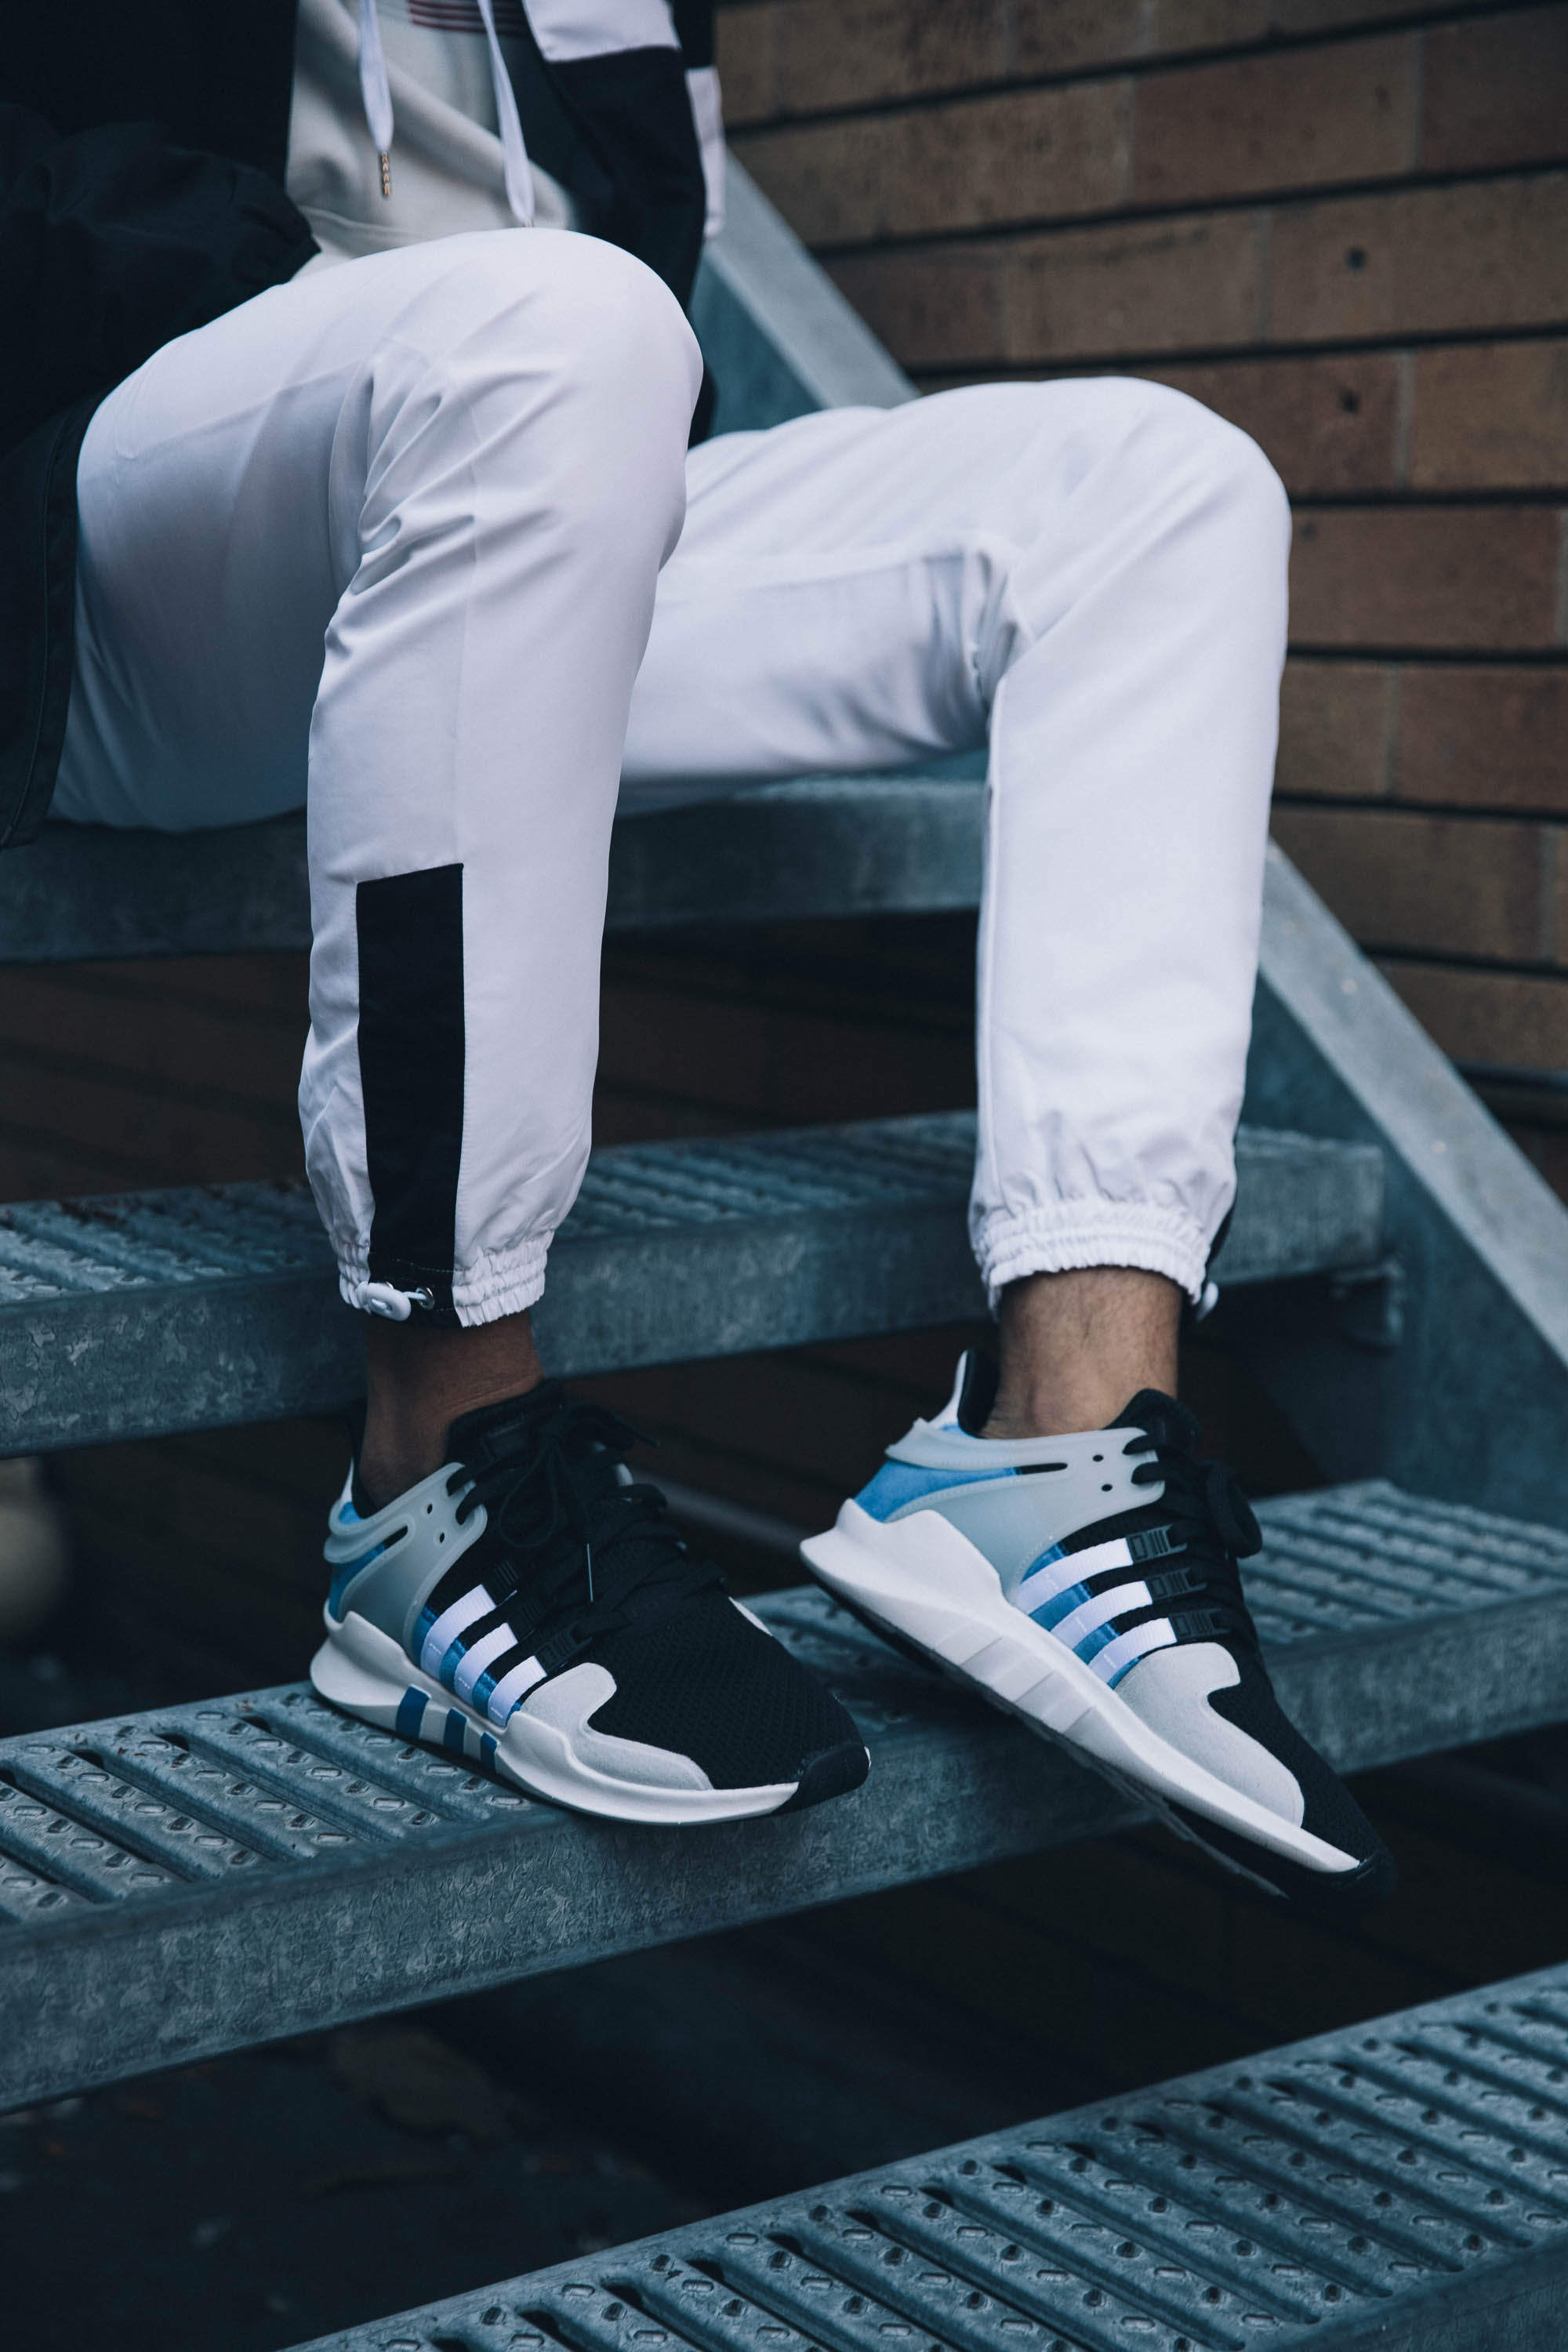 adidas eqt support adv pk by9583